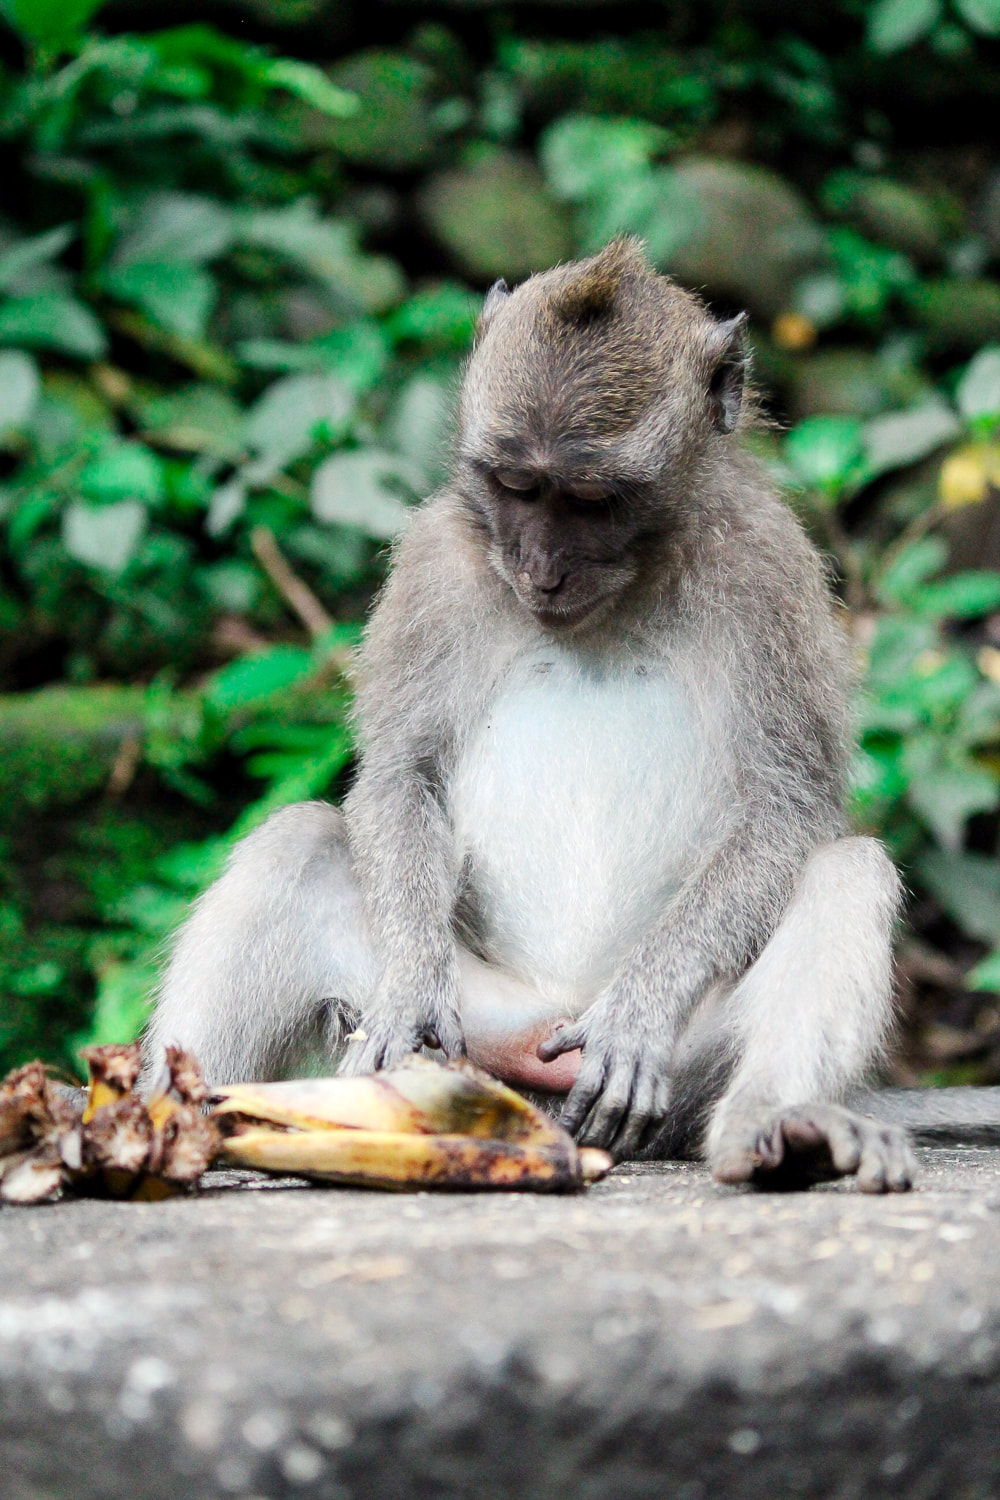 Grey-haired, long-tail, macaque. Dinner time (Bananas) at the Sacred Monkey Forest Sanctuary, Ubud, Bali, Indonesia.